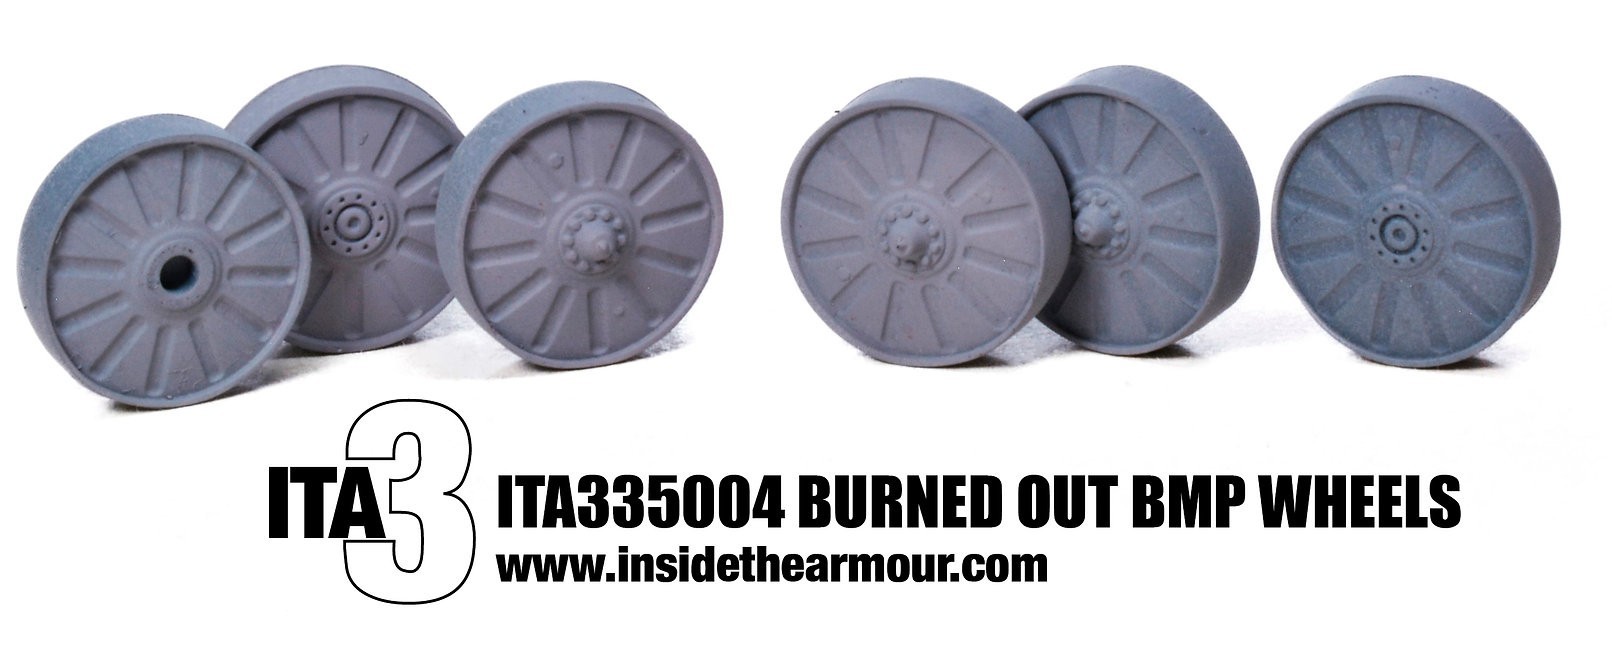 ITA335004 1/35 burned out BMP wheels